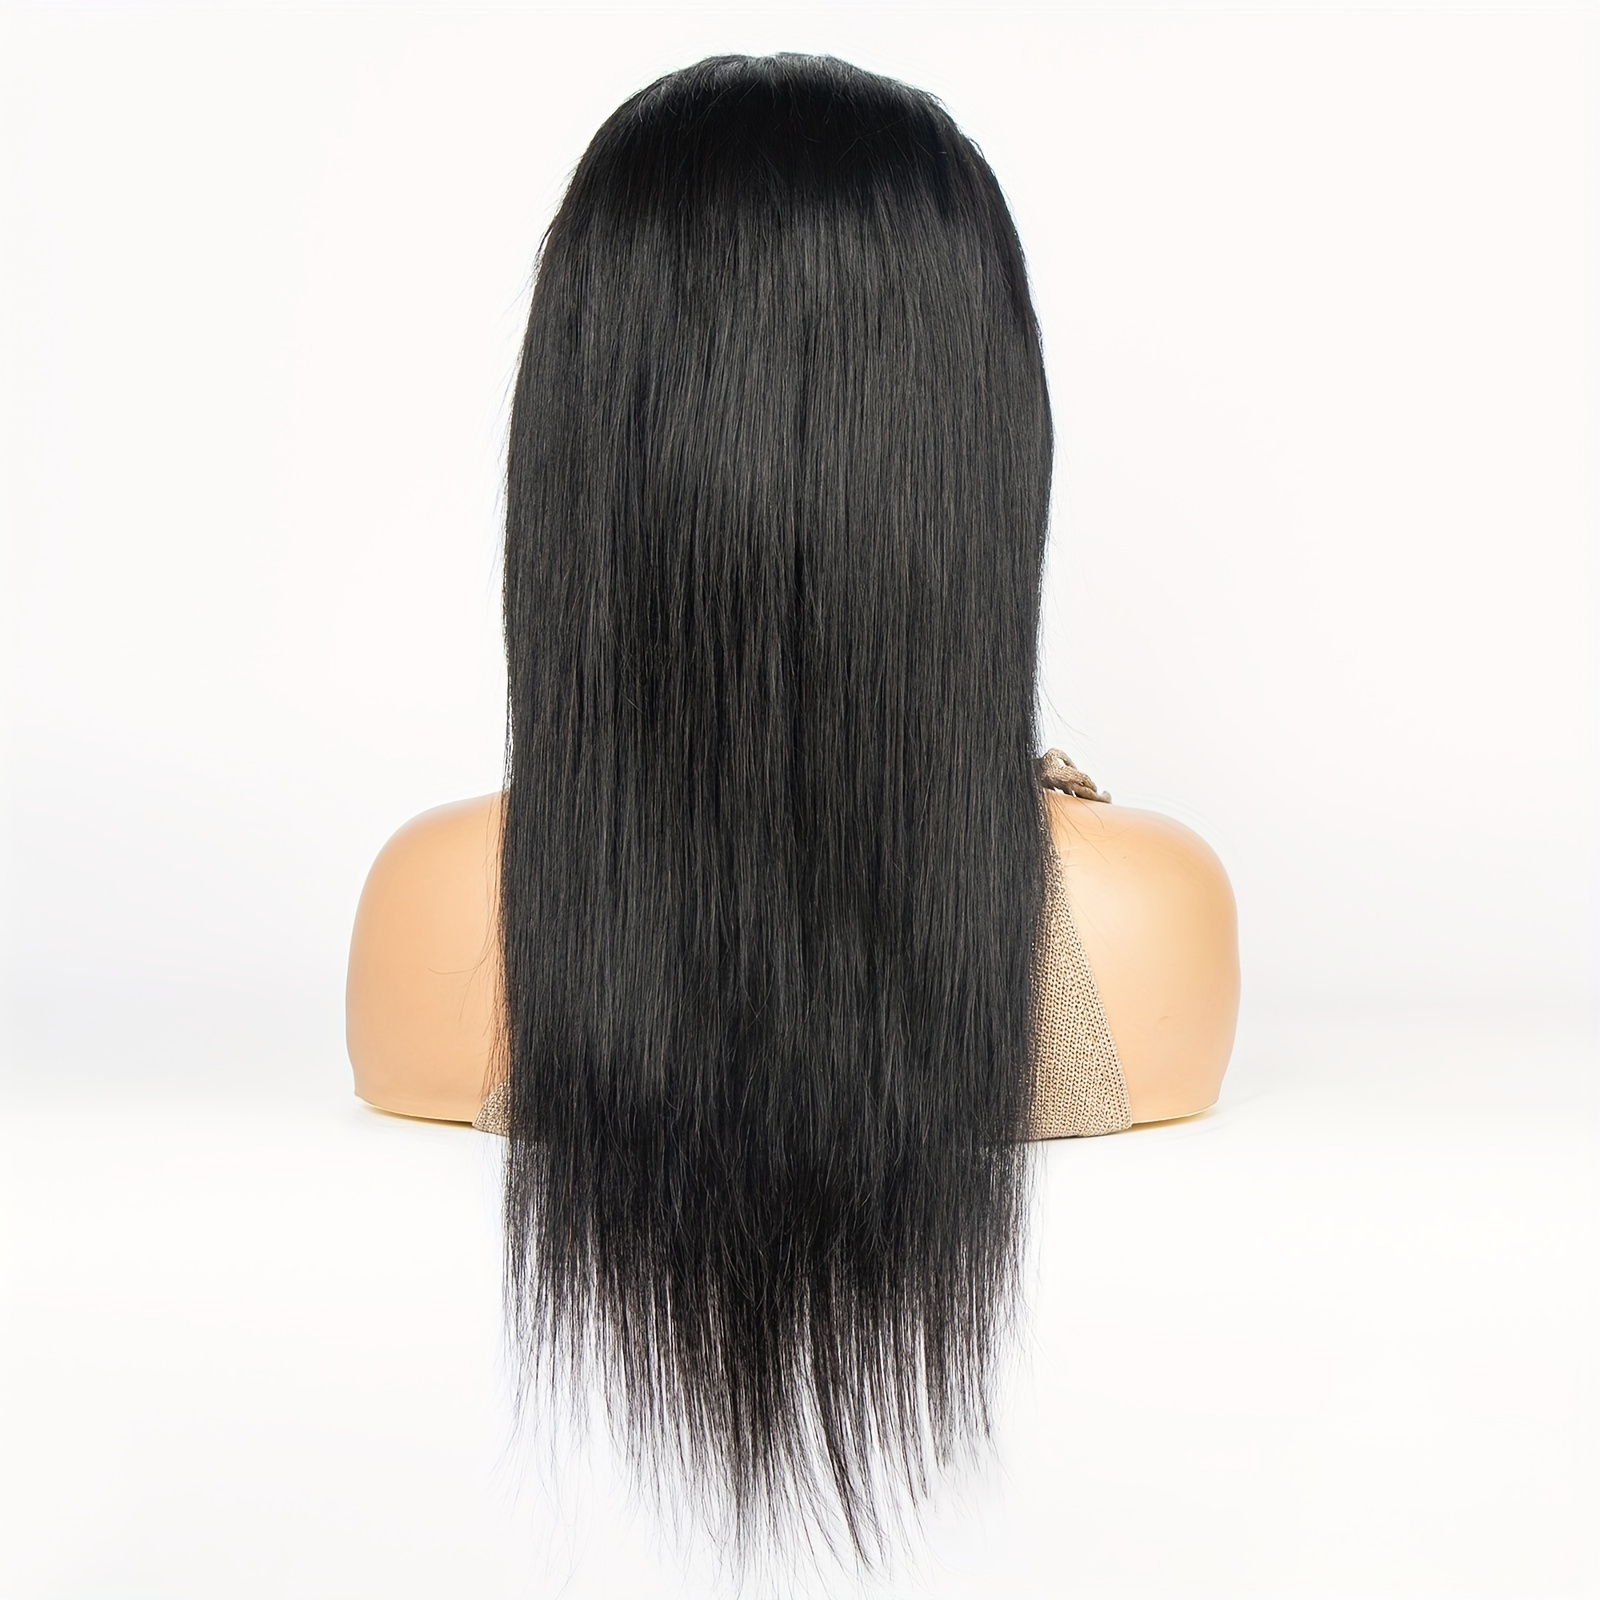  GAEINO 40 inch Wig Human Hair Straight Lace Front Wigs Human  Hair For Women 12A 180 Density Full 13x4 Straight Frontal Wigs Human Hair  HD Lace Front Wig Pre Plucked